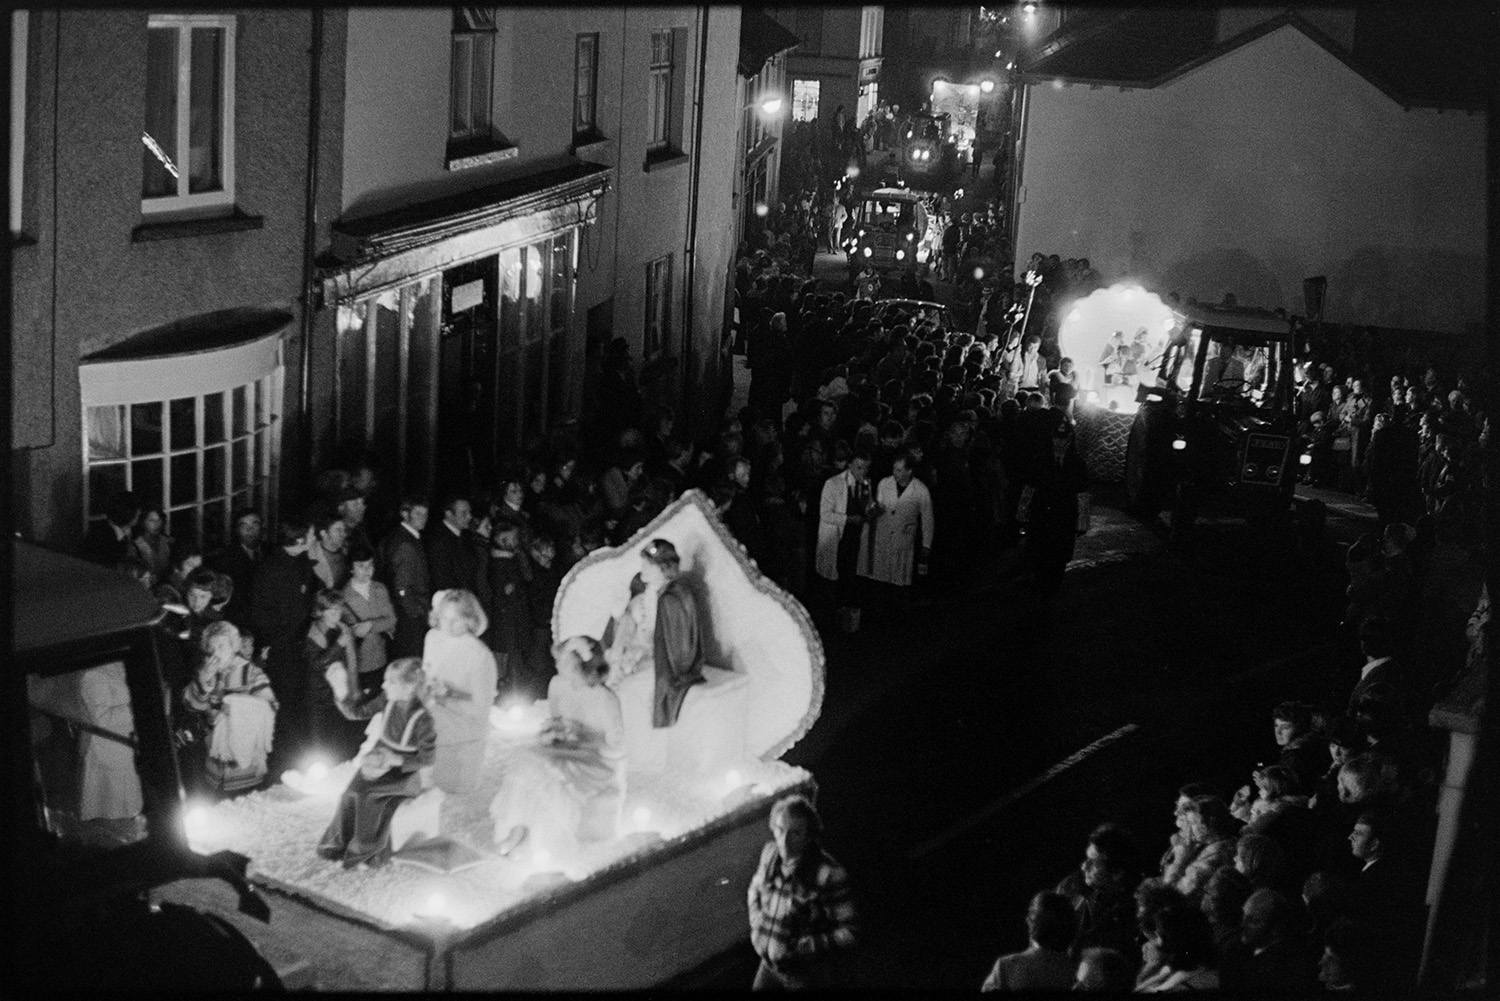 Carnival floats at night with torches. 
[Spectators watching carnival floats parade through the town for Hatherleigh Carnival, at night. A carnival float can be seen in the foreground, possibly with the Carnival Queen and her attendants.]